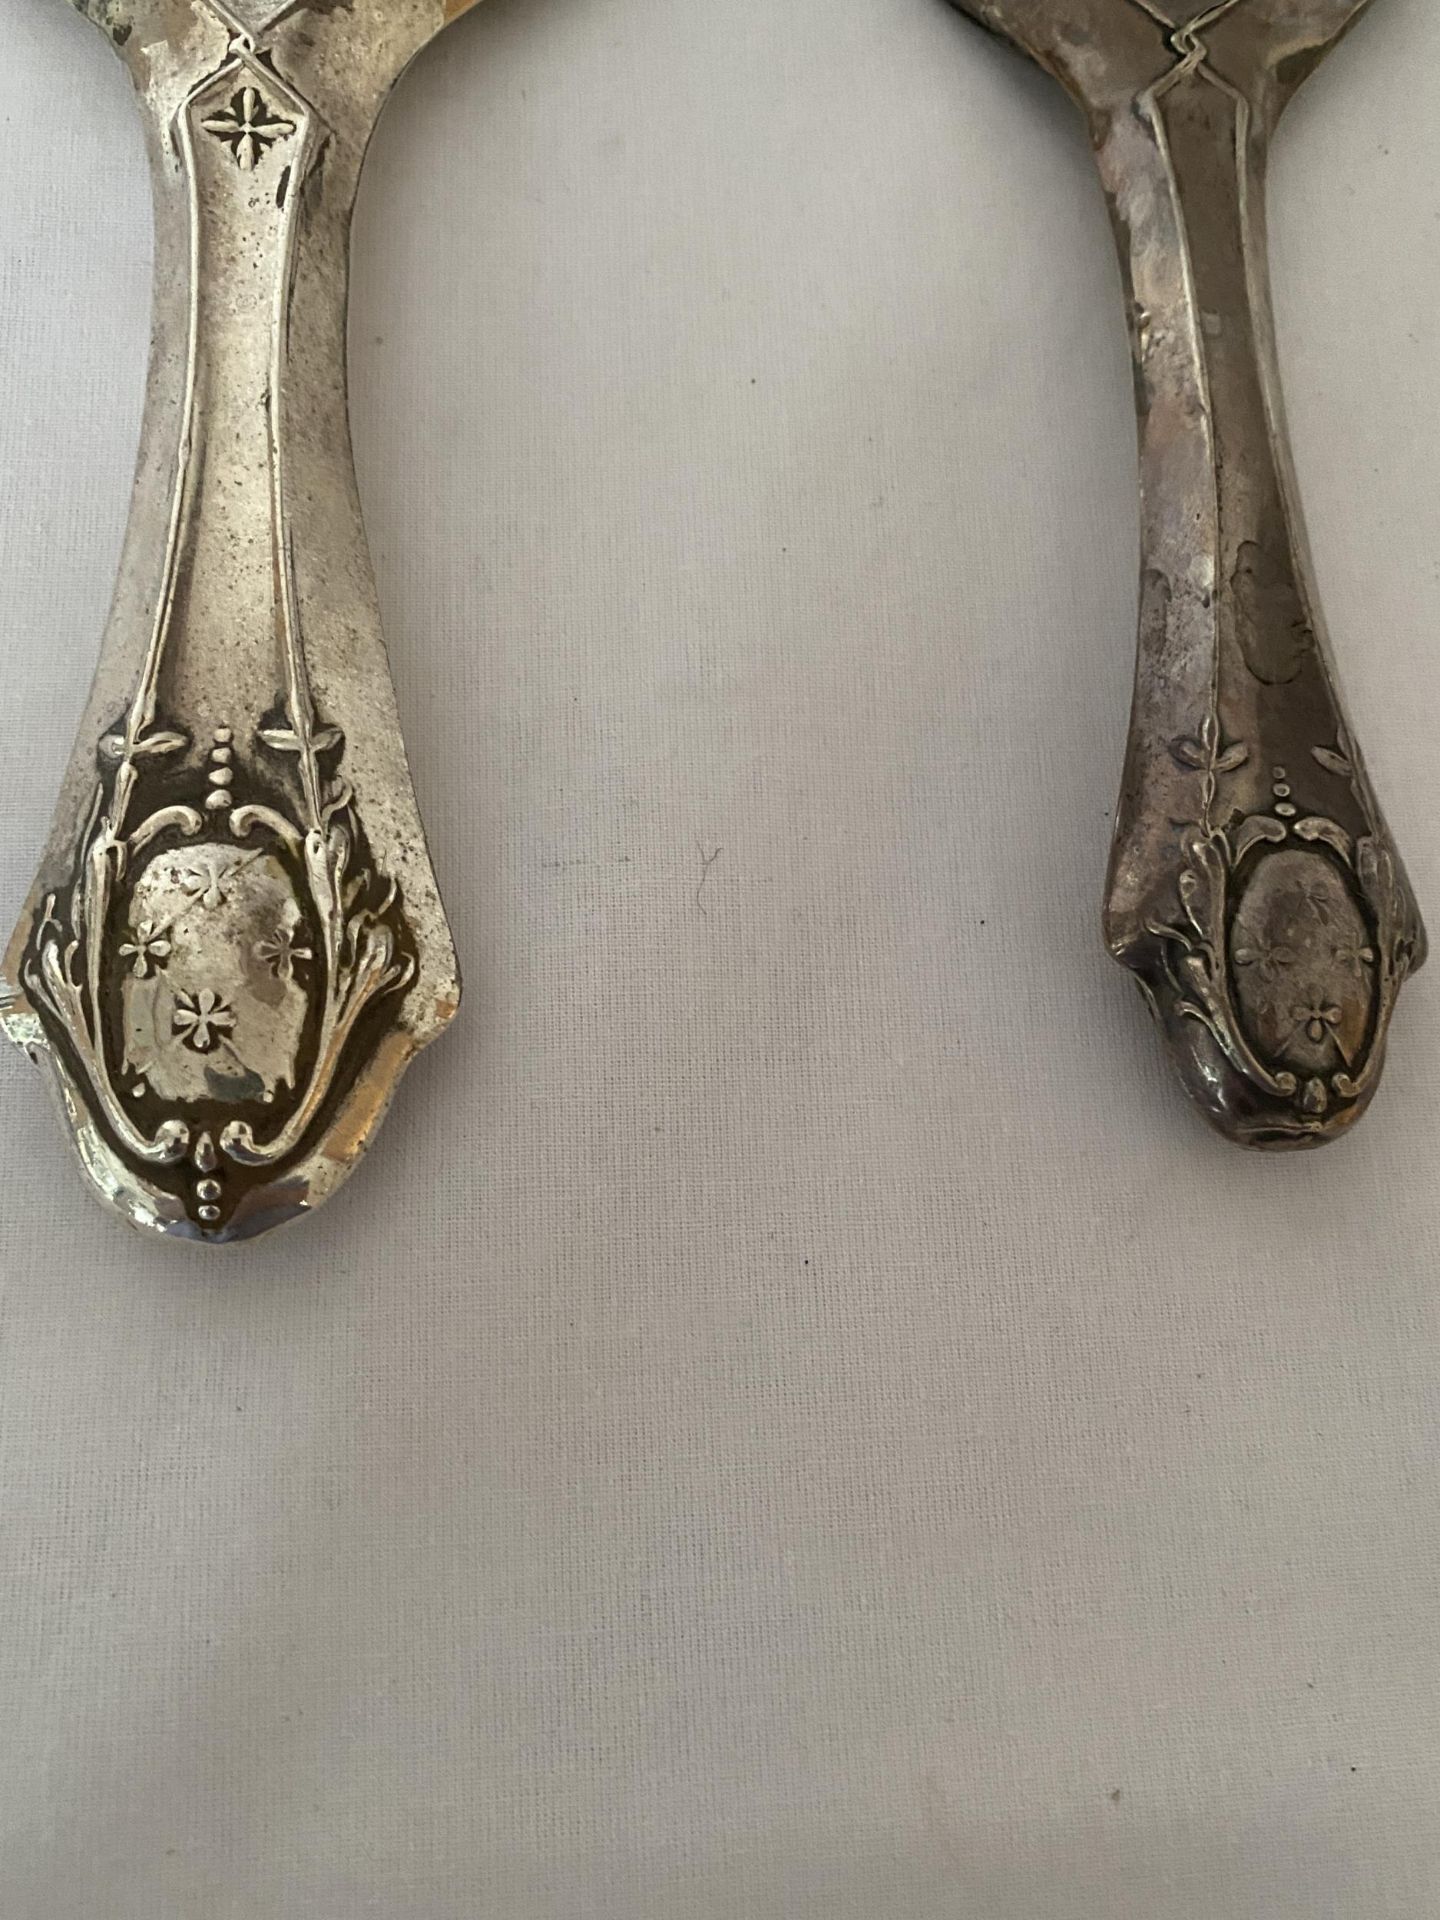 TWO HALLMARKED BIRMINGHAM SILVER BACKED HAND MIRRORS, EARLIEST DATING TO 1913 - Image 8 of 18